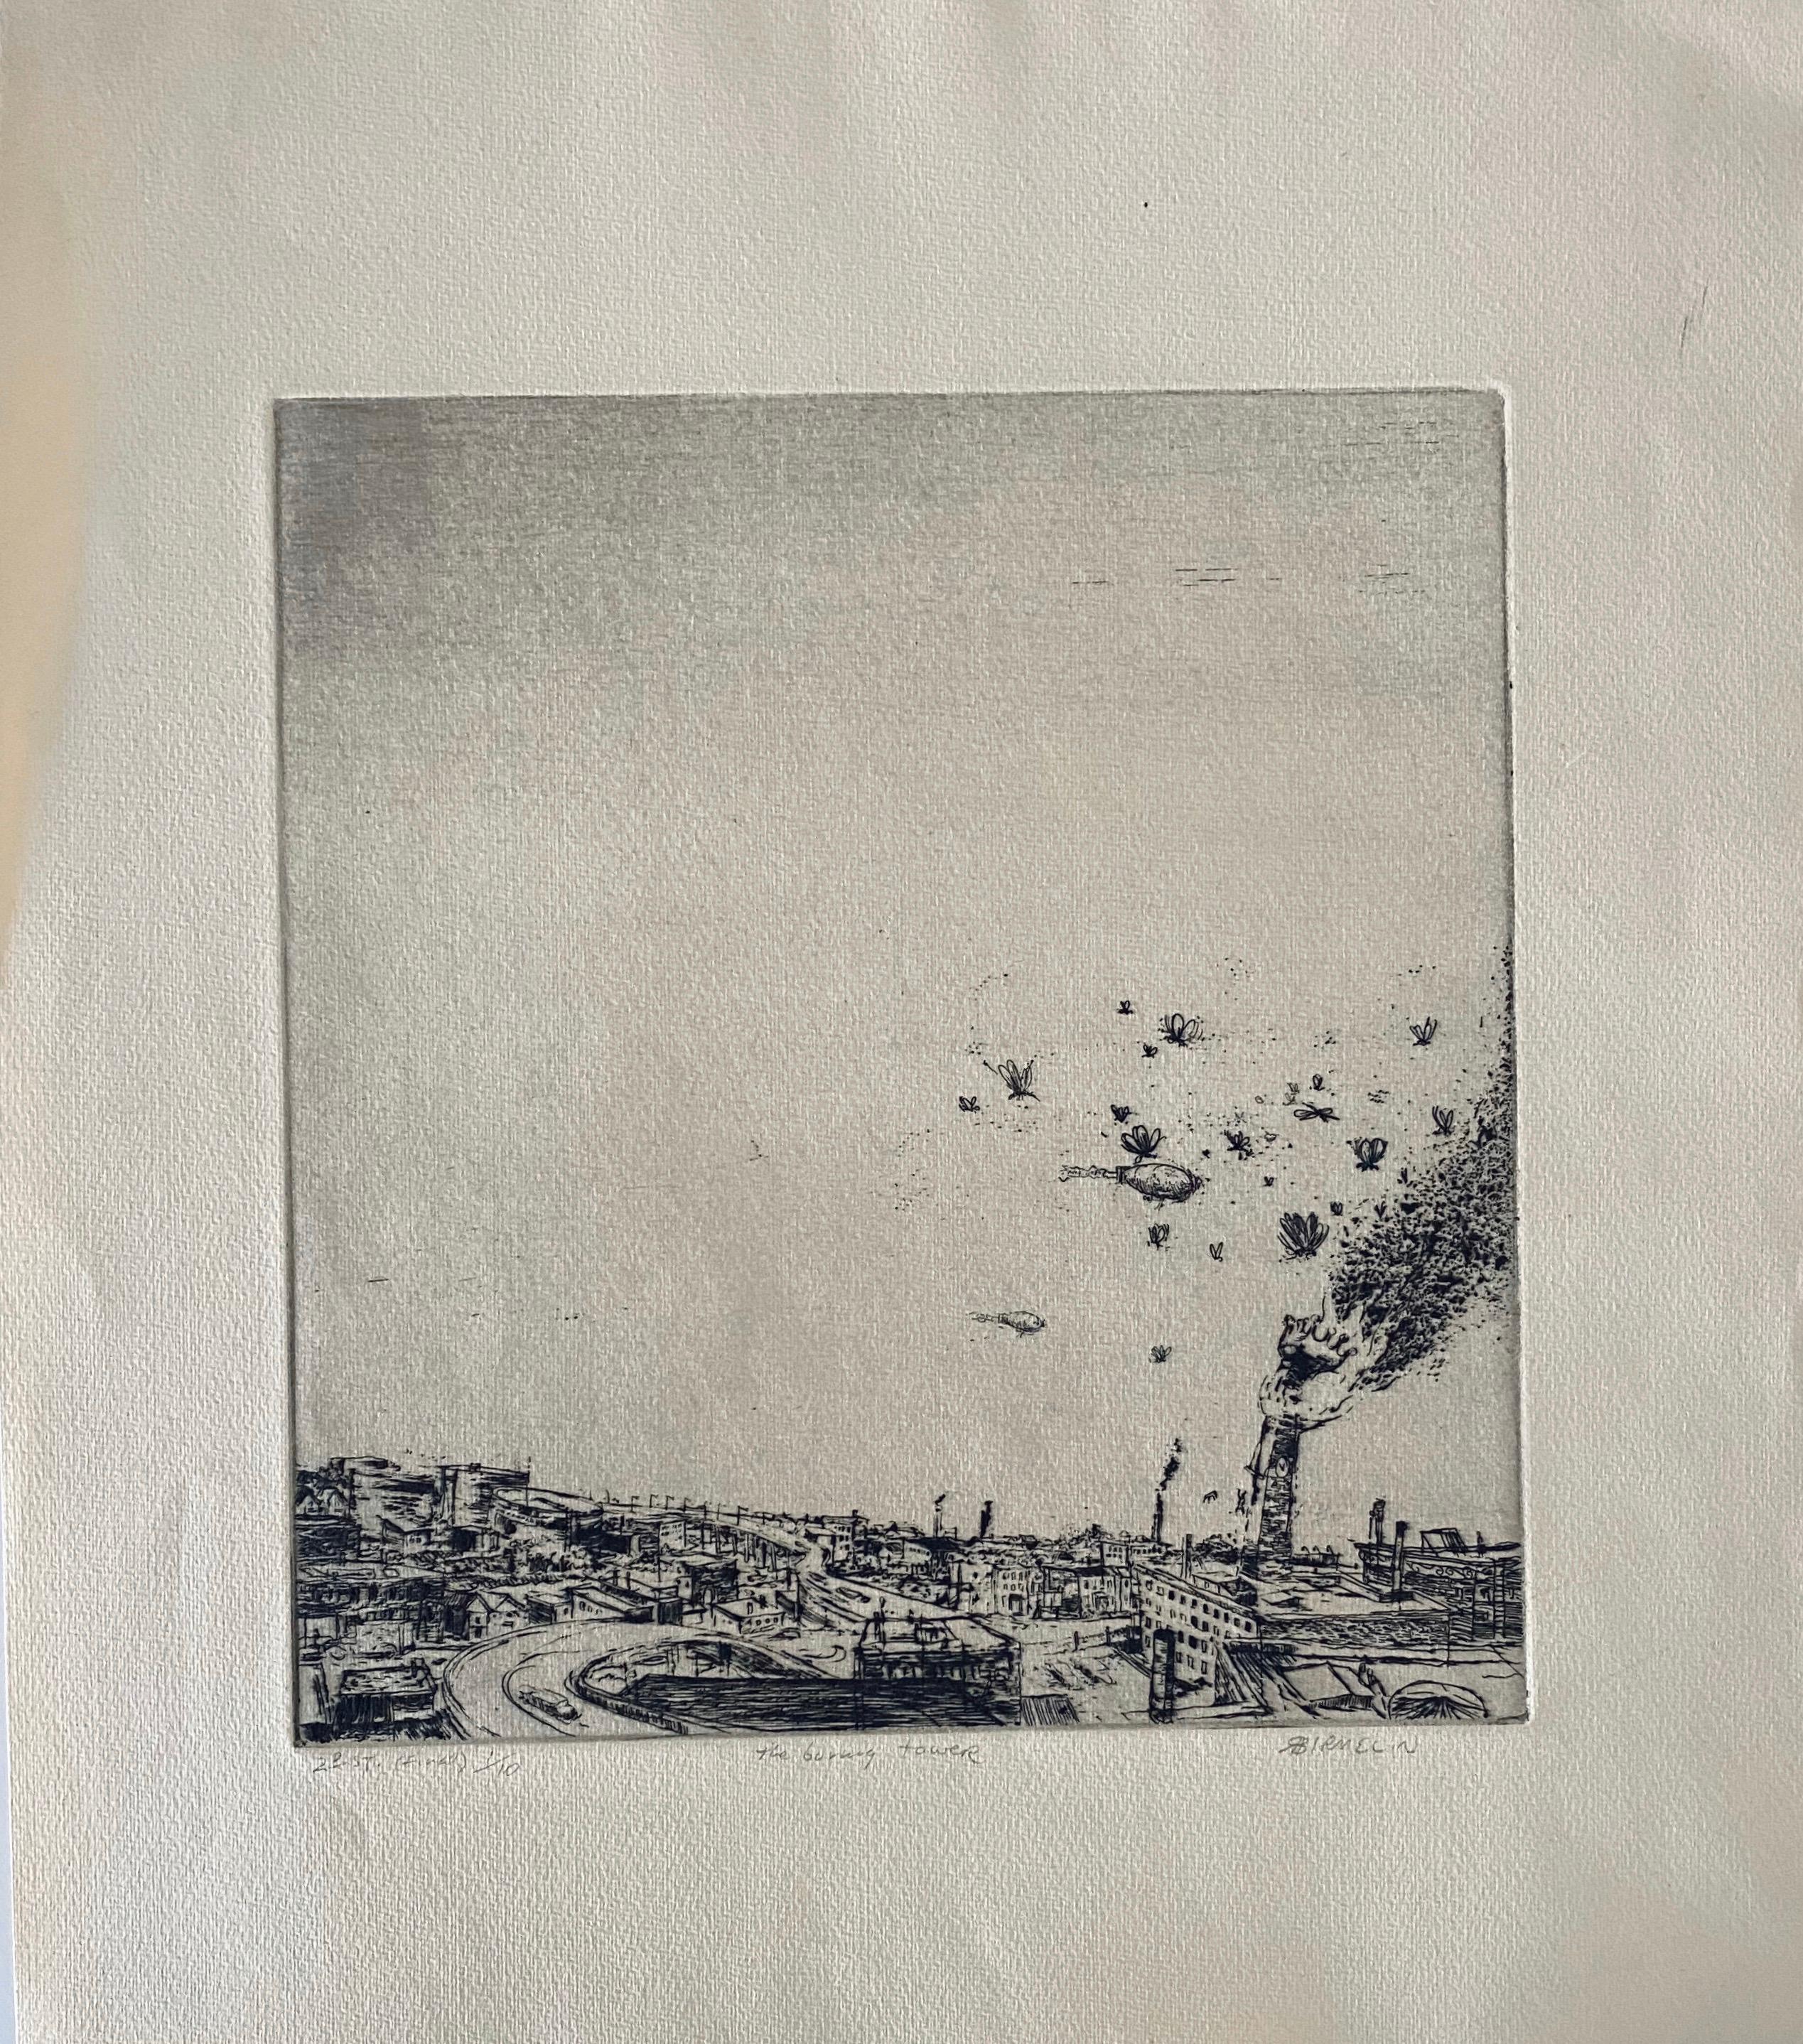 The Burning Tower, American Modernist Abstract Landscape Etching - Print by Robert A. Birmelin